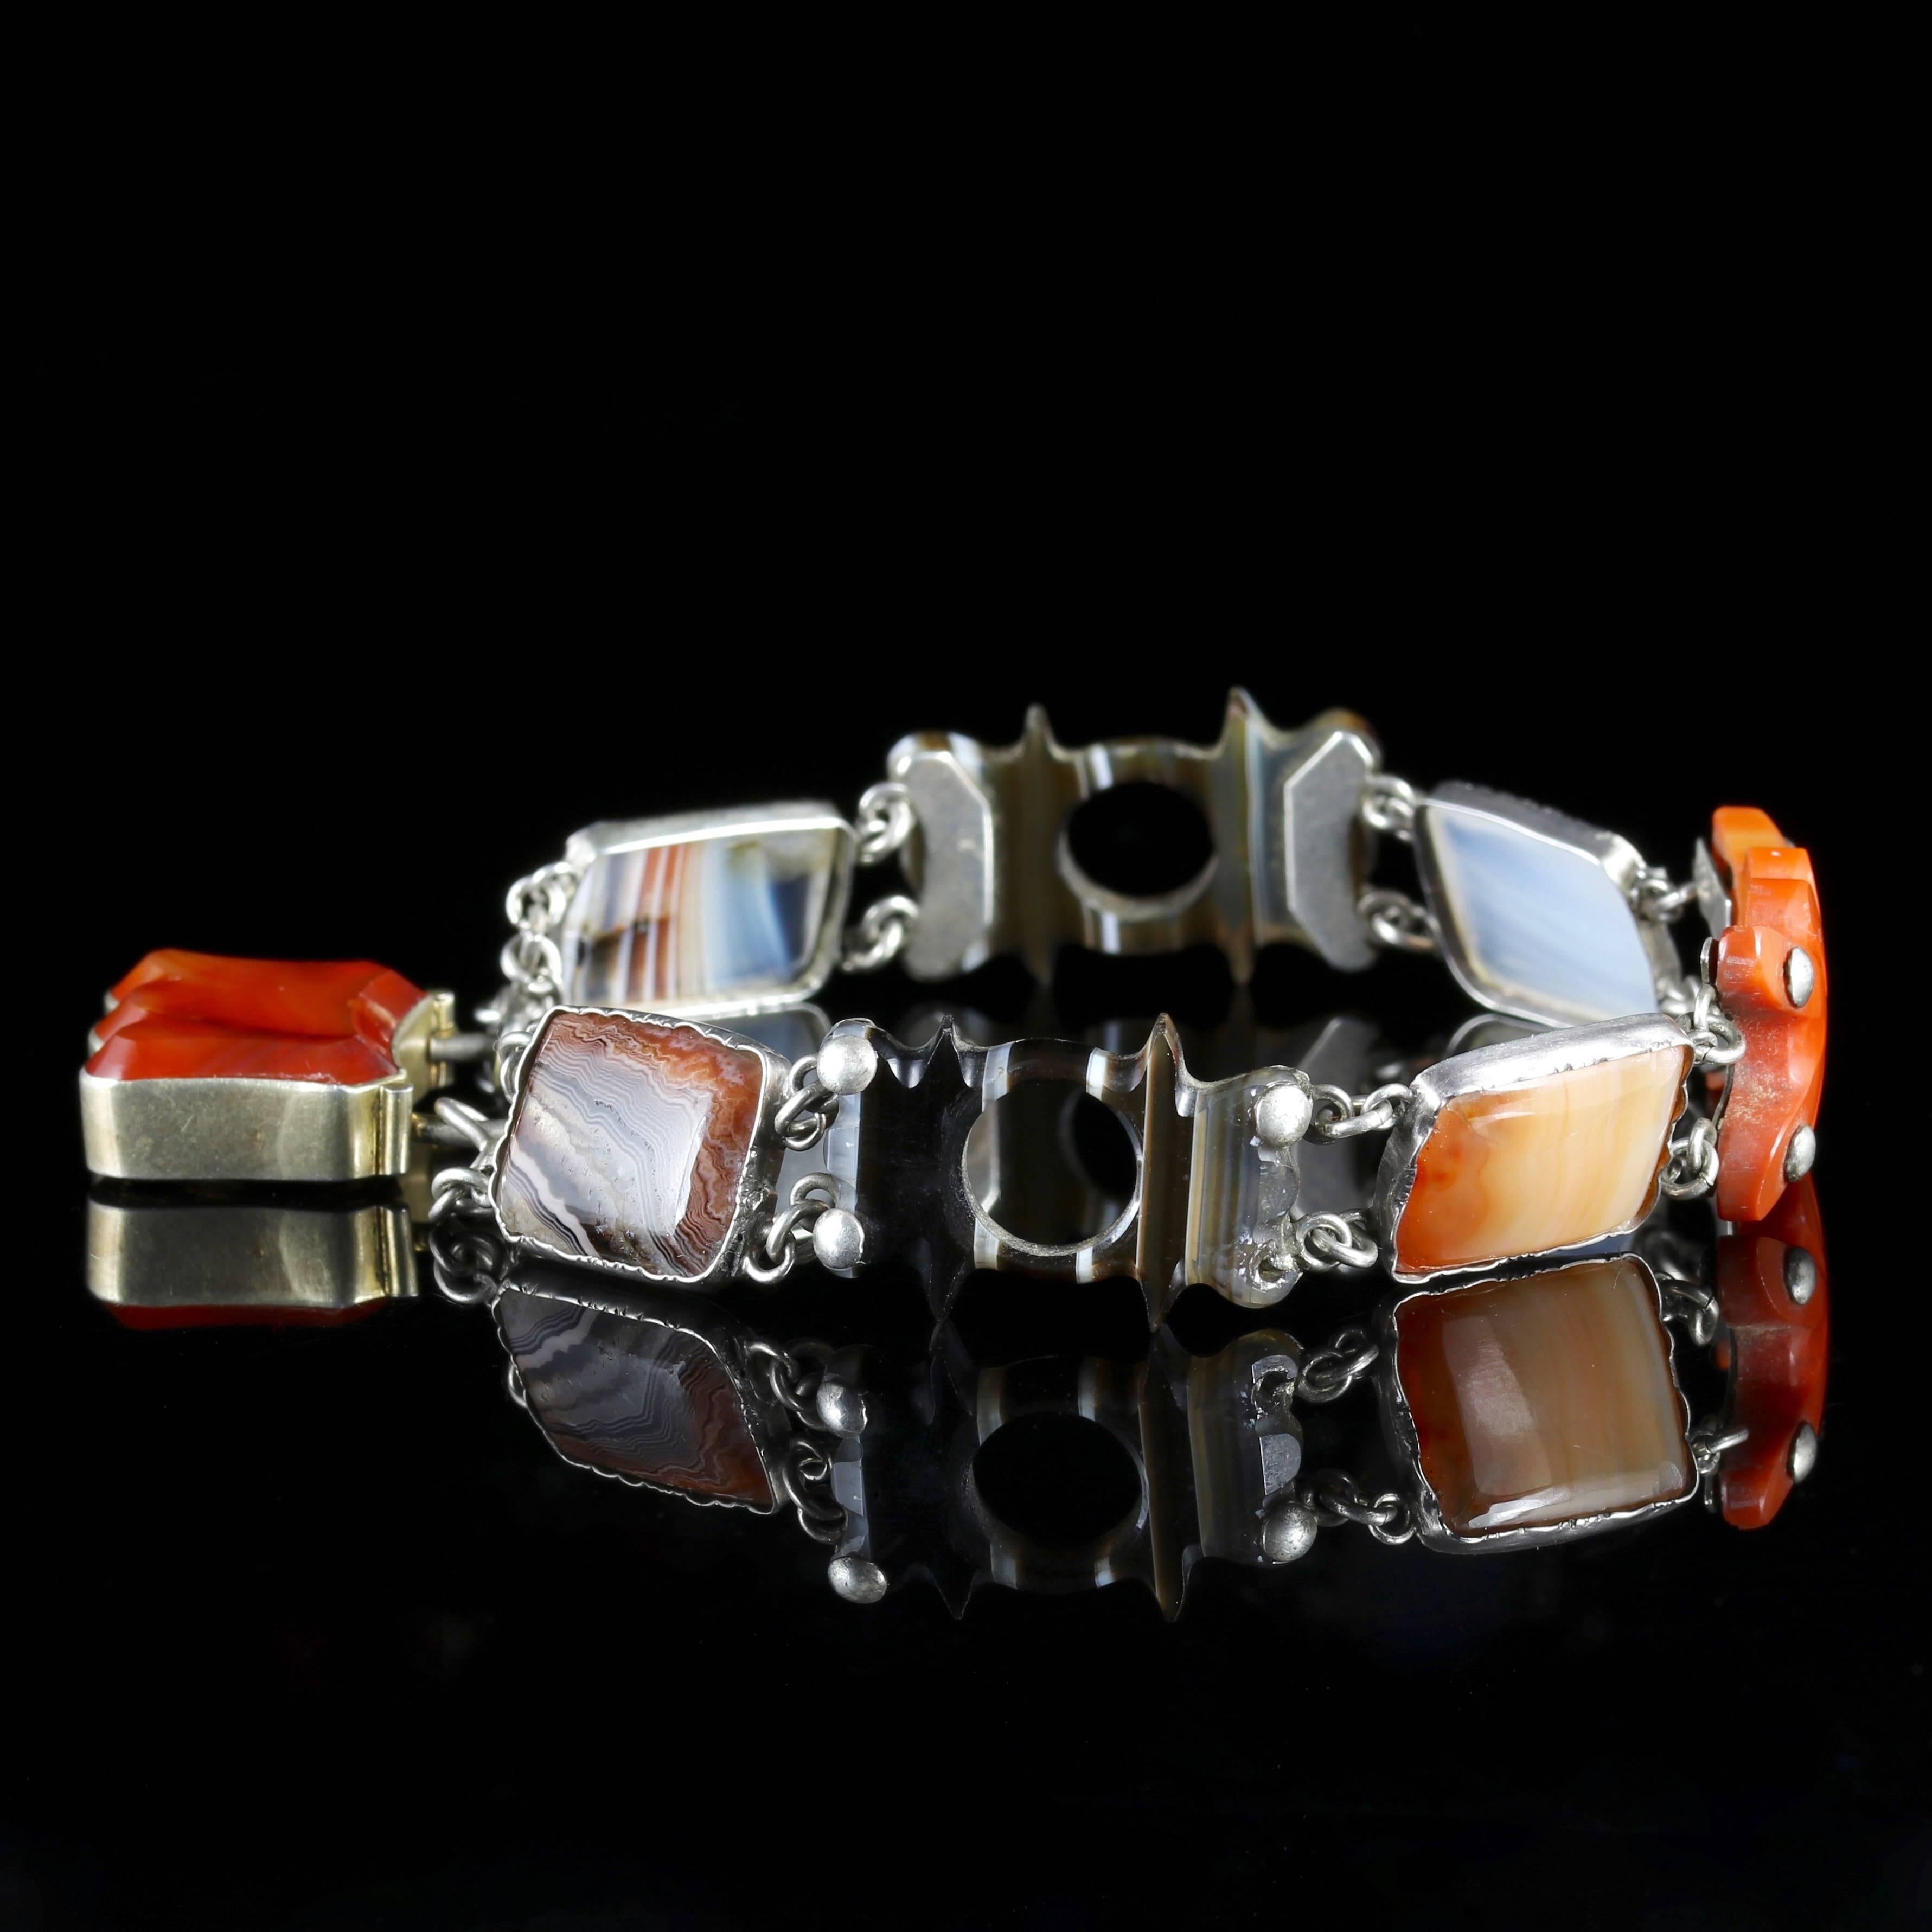 This fabulous Victorian Sterling Silver Scottish Agate bracelet is Circa 1860.

Scottish jewellery was made popular by Queen Victoria as it became a souvenir of her trips to Scotland. 

From the mid 1800's Queen Victoria frequented Scotland and her